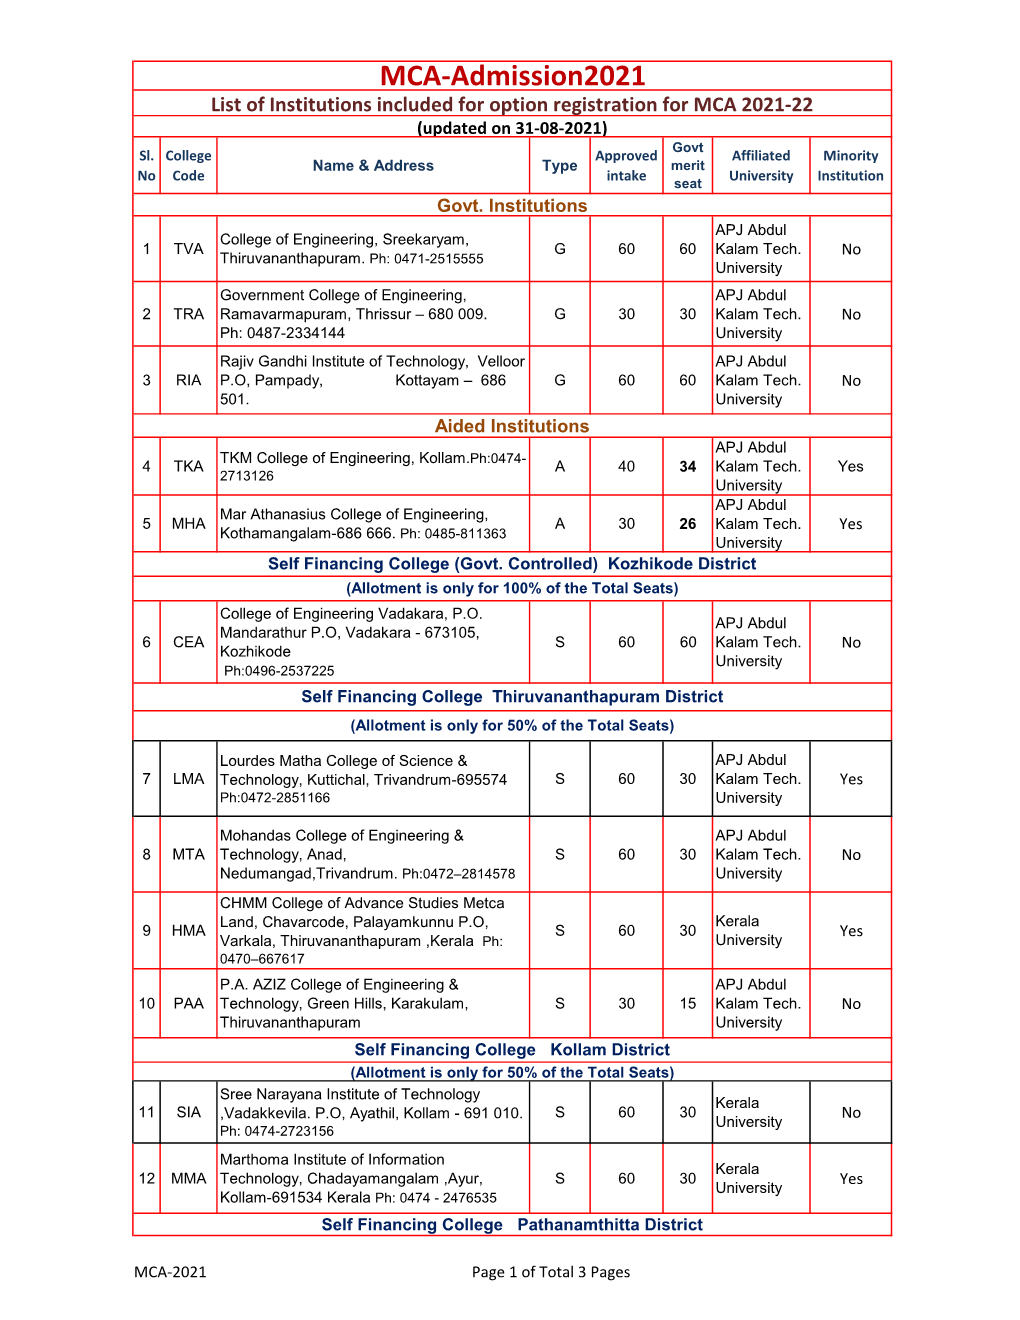 MCA-Admission2021 List of Institutions Included for Option Registration for MCA 2021-22 (Updated on 31-08-2021) Govt Sl